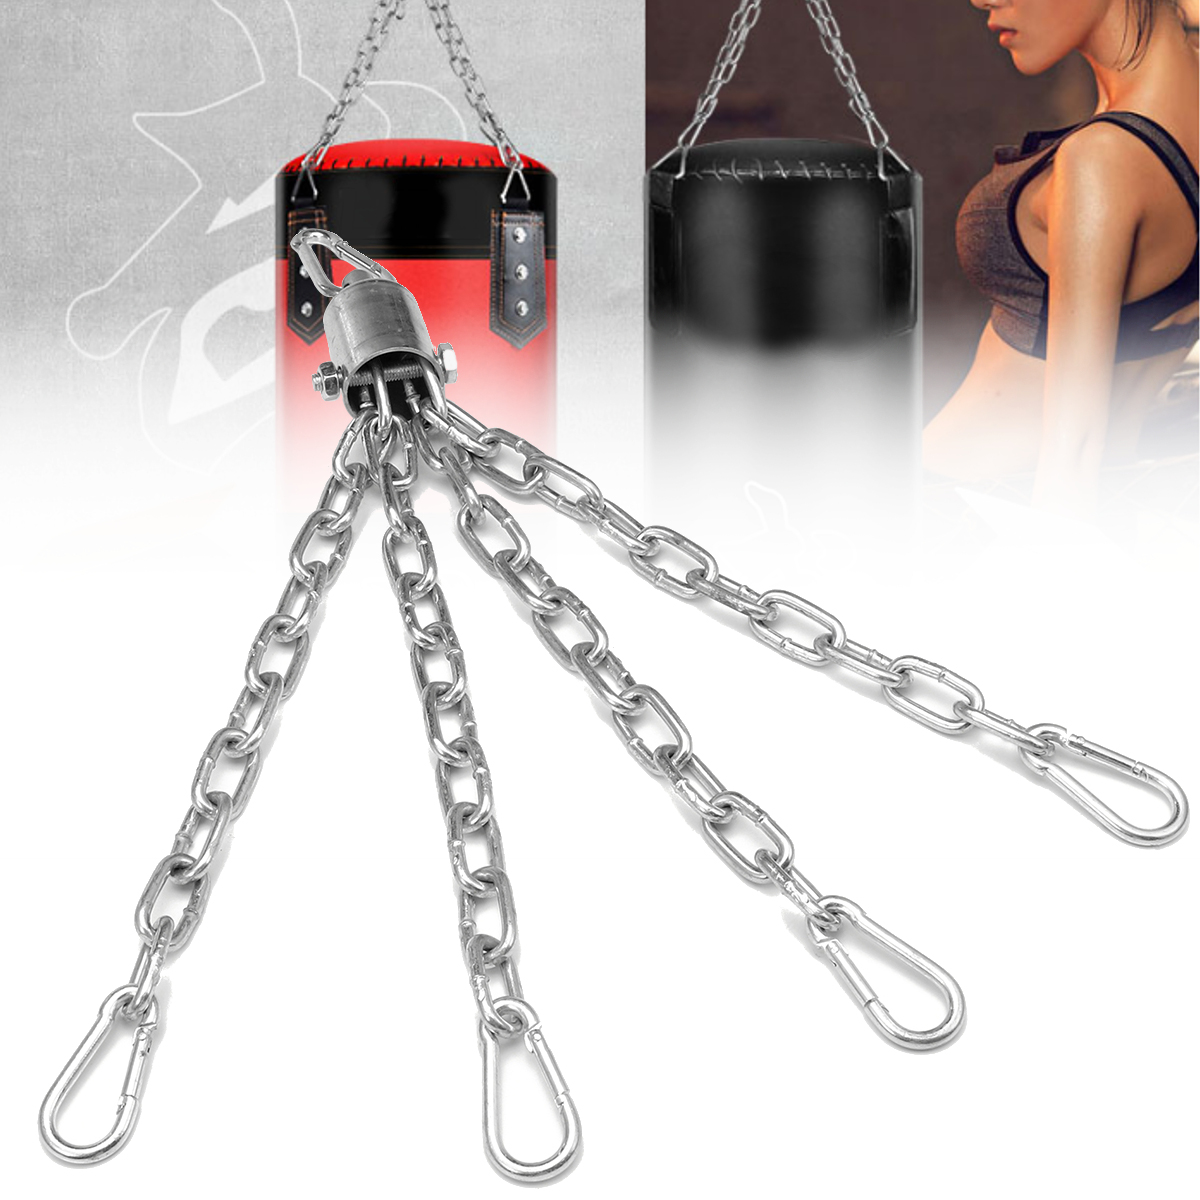 

Boxing Target Sandbags Punch Bag Ceiling Hook With Chains Strand Steel Wall Bracket for Boxing